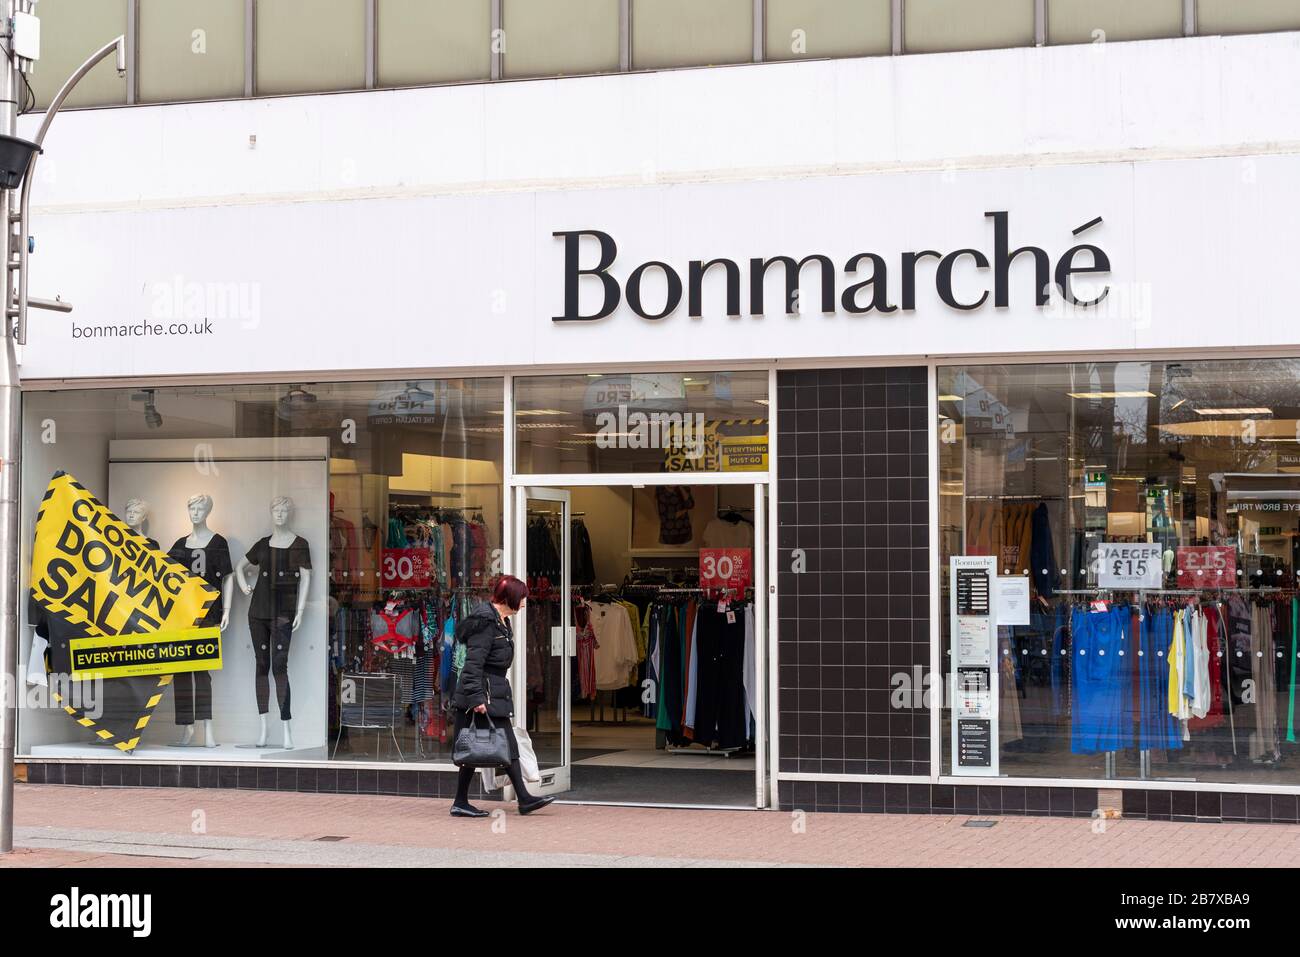 Bonmarche shop in Southend on Sea, Essex, UK. Fashion business in administration with closing down sale sign. Collapsing. Person walking past Stock Photo